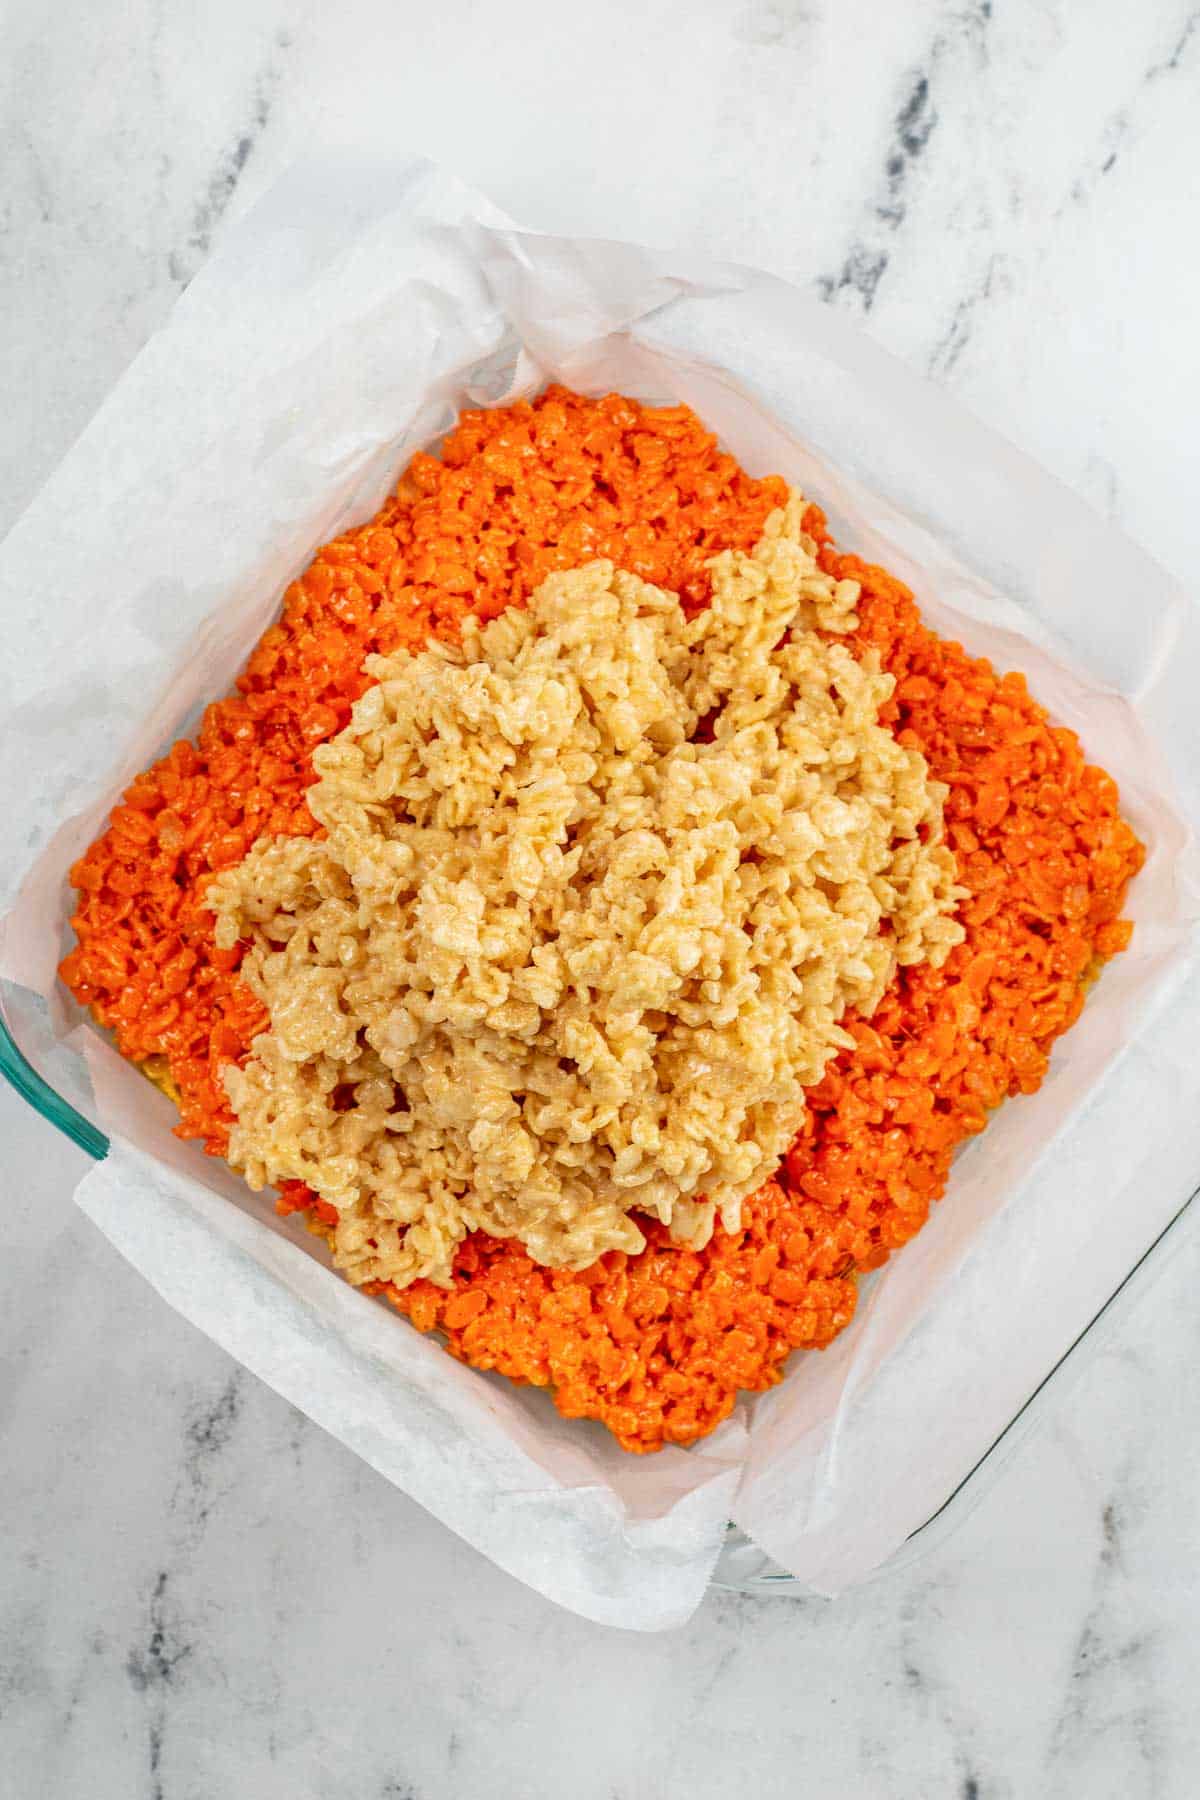 square glass dish with orange rice krispie treats topped white rice cereal mixture